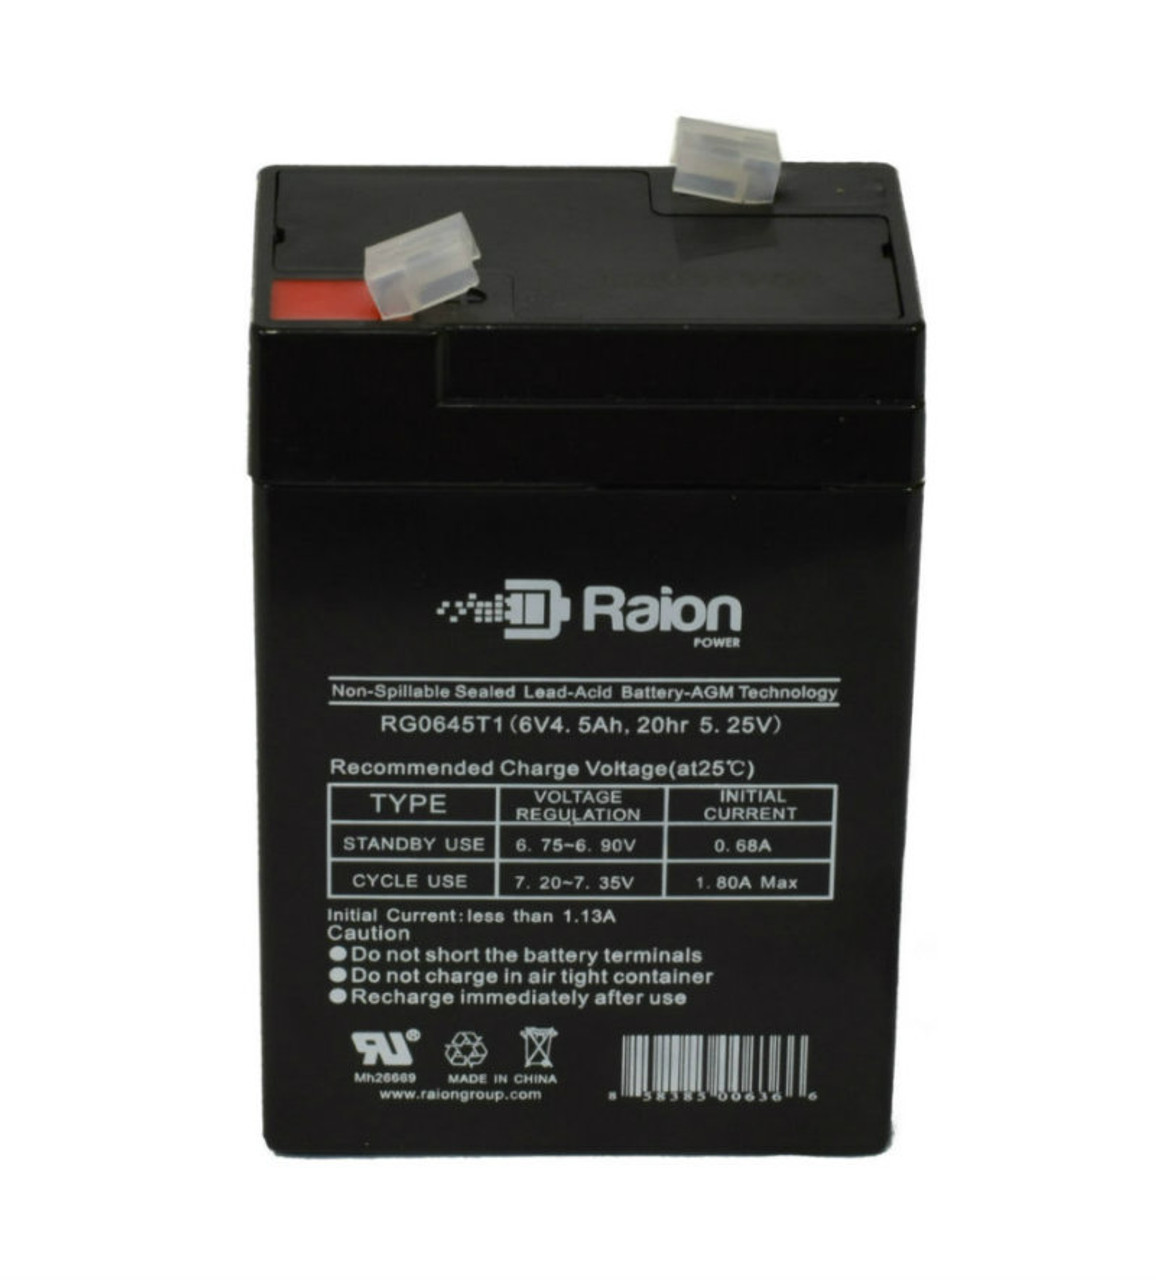 Raion Power RG0645T1 Replacement Battery Cartridge for Arjo-Century SARA Plus Standing Aid